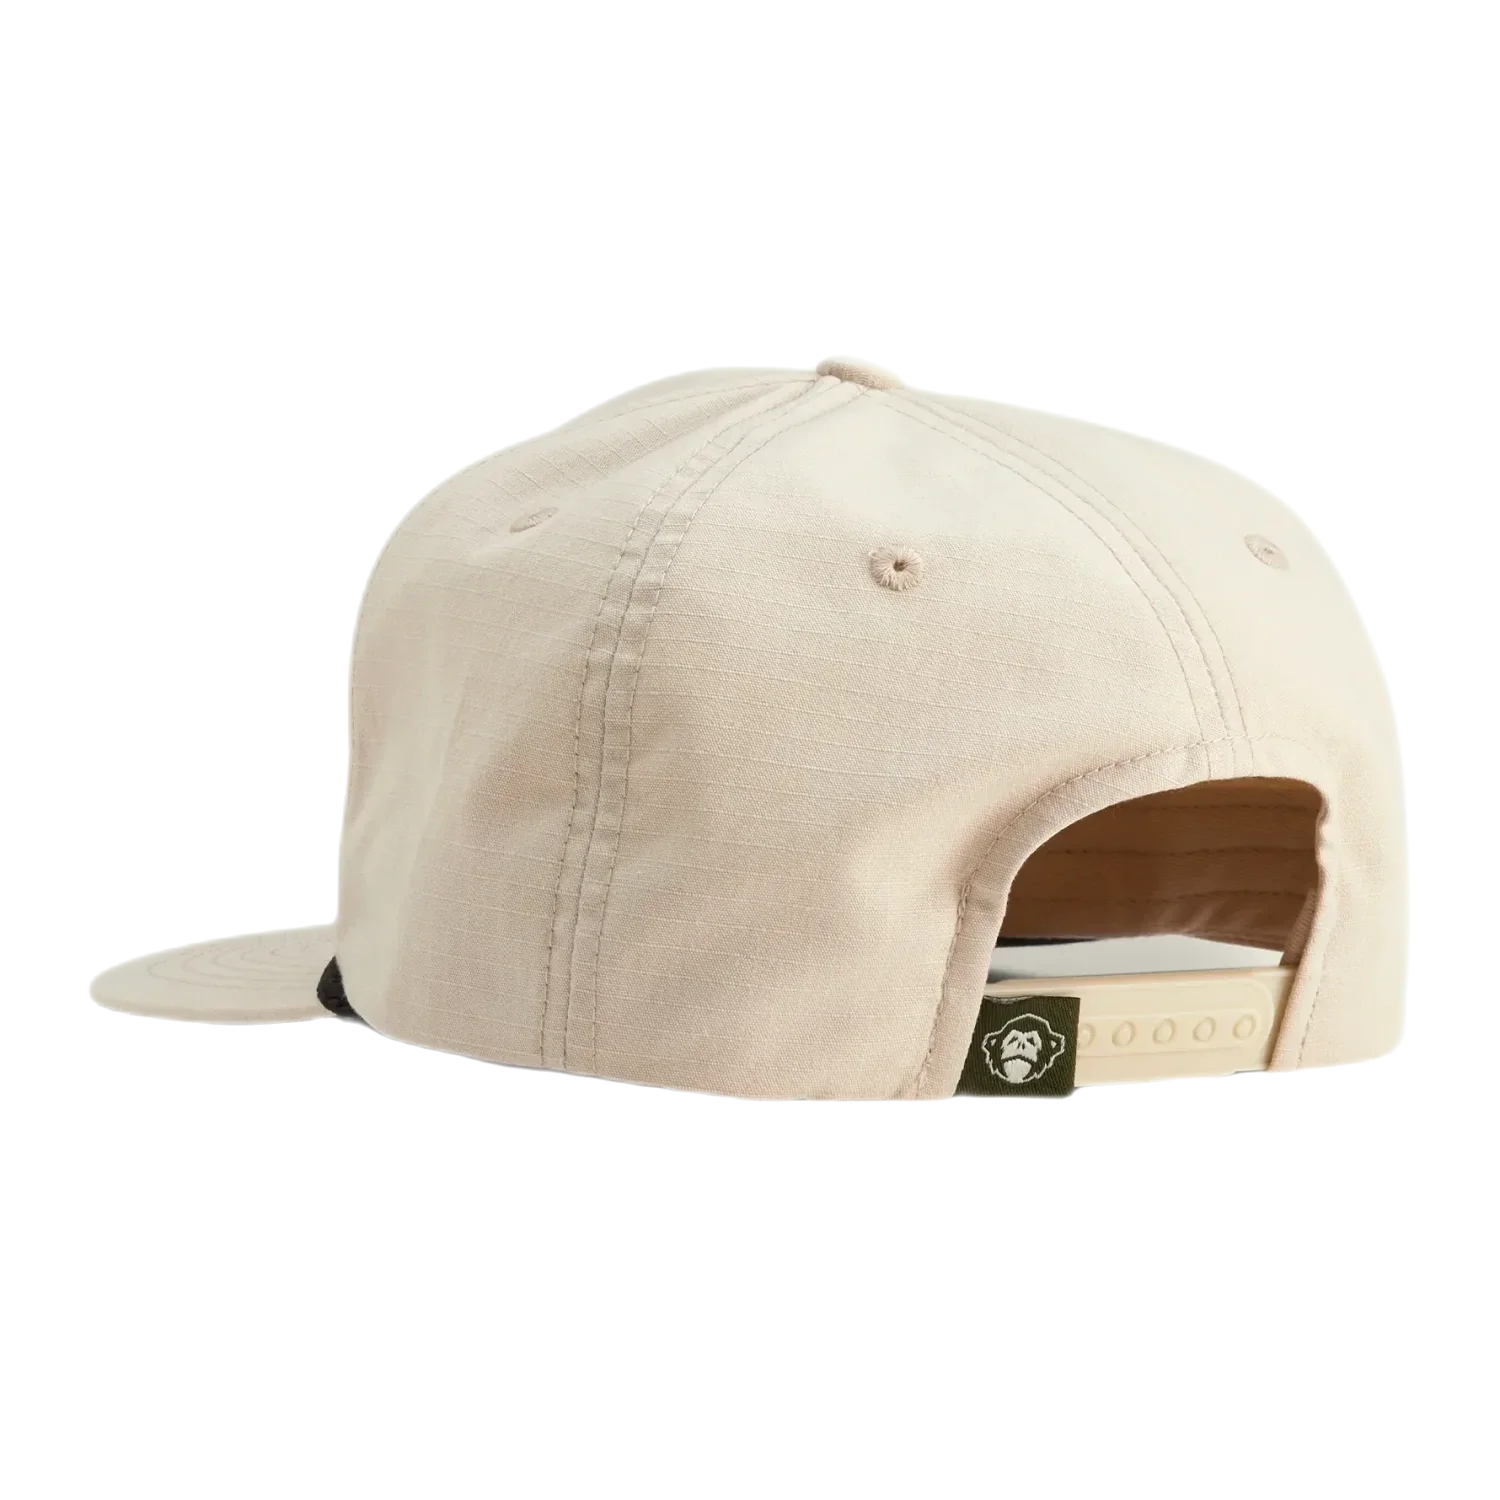 Howler Bros 20. HATS_GLOVES_SCARVES - HATS Unstructured Snapback Hats CHATTY BIRD | STONE OS